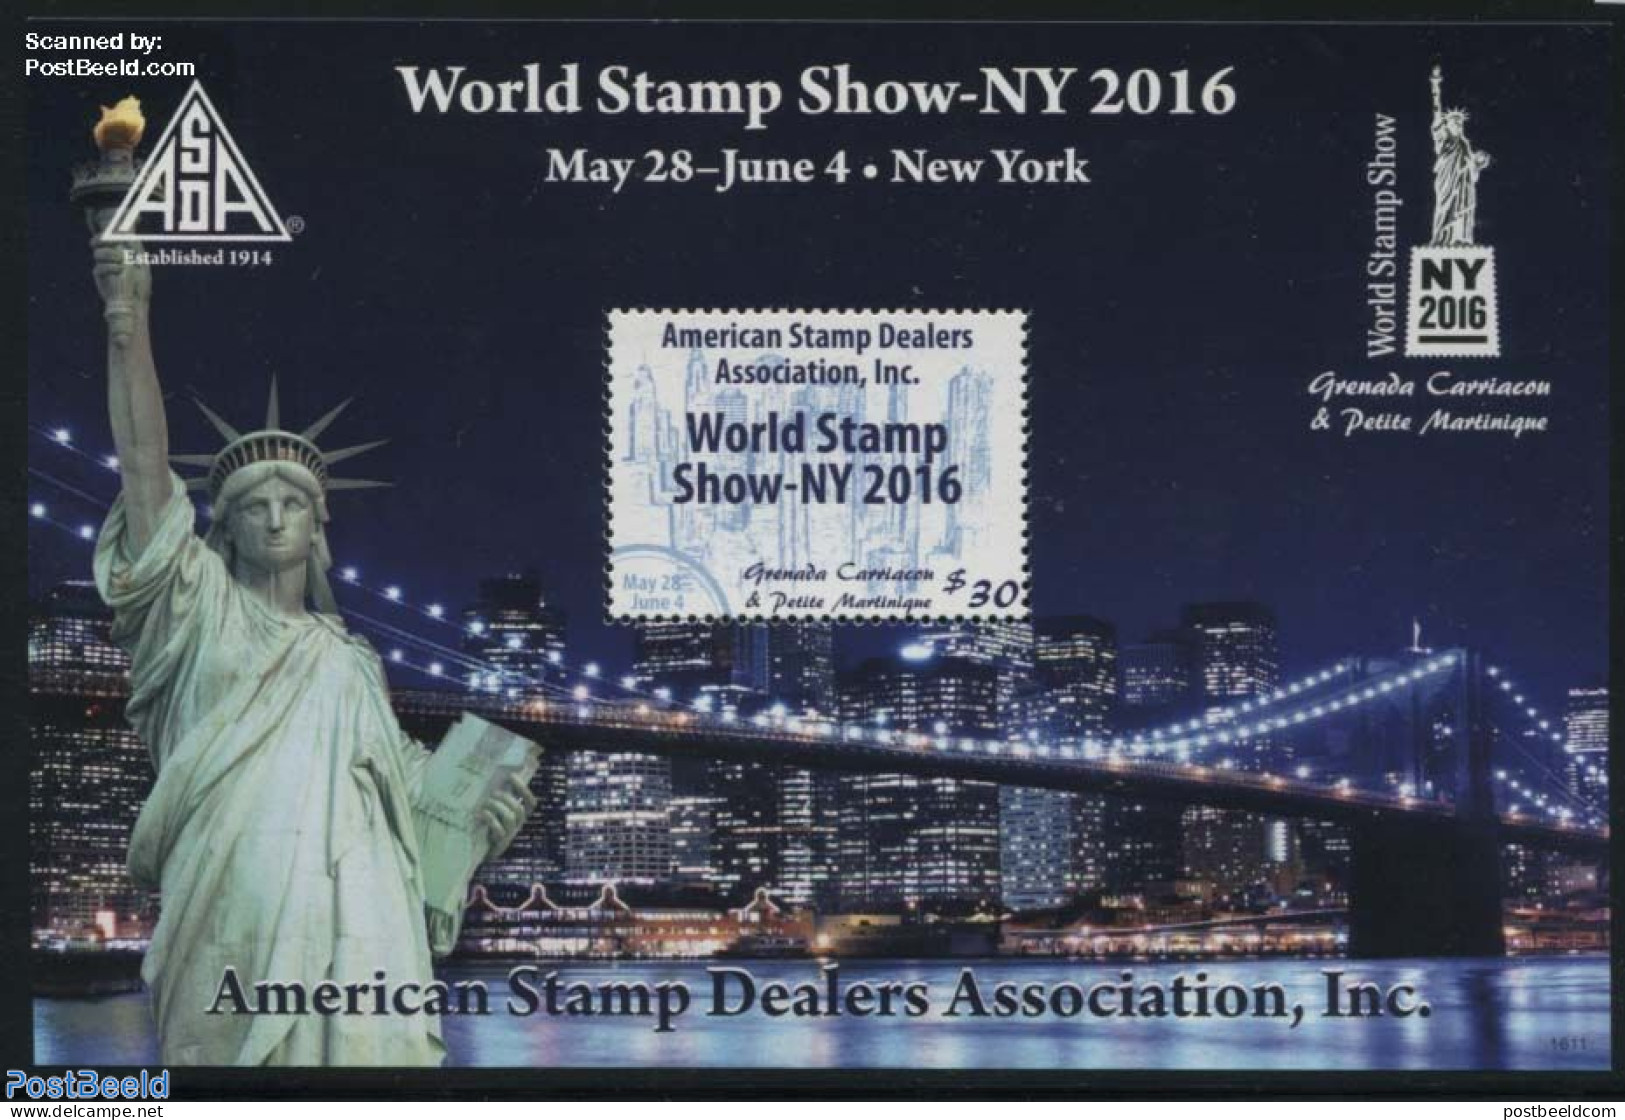 Grenada Grenadines 2016 World Stamp Show NY 2016 S/s, Mint NH, Philately - Art - Bridges And Tunnels - Sculpture - Ponti